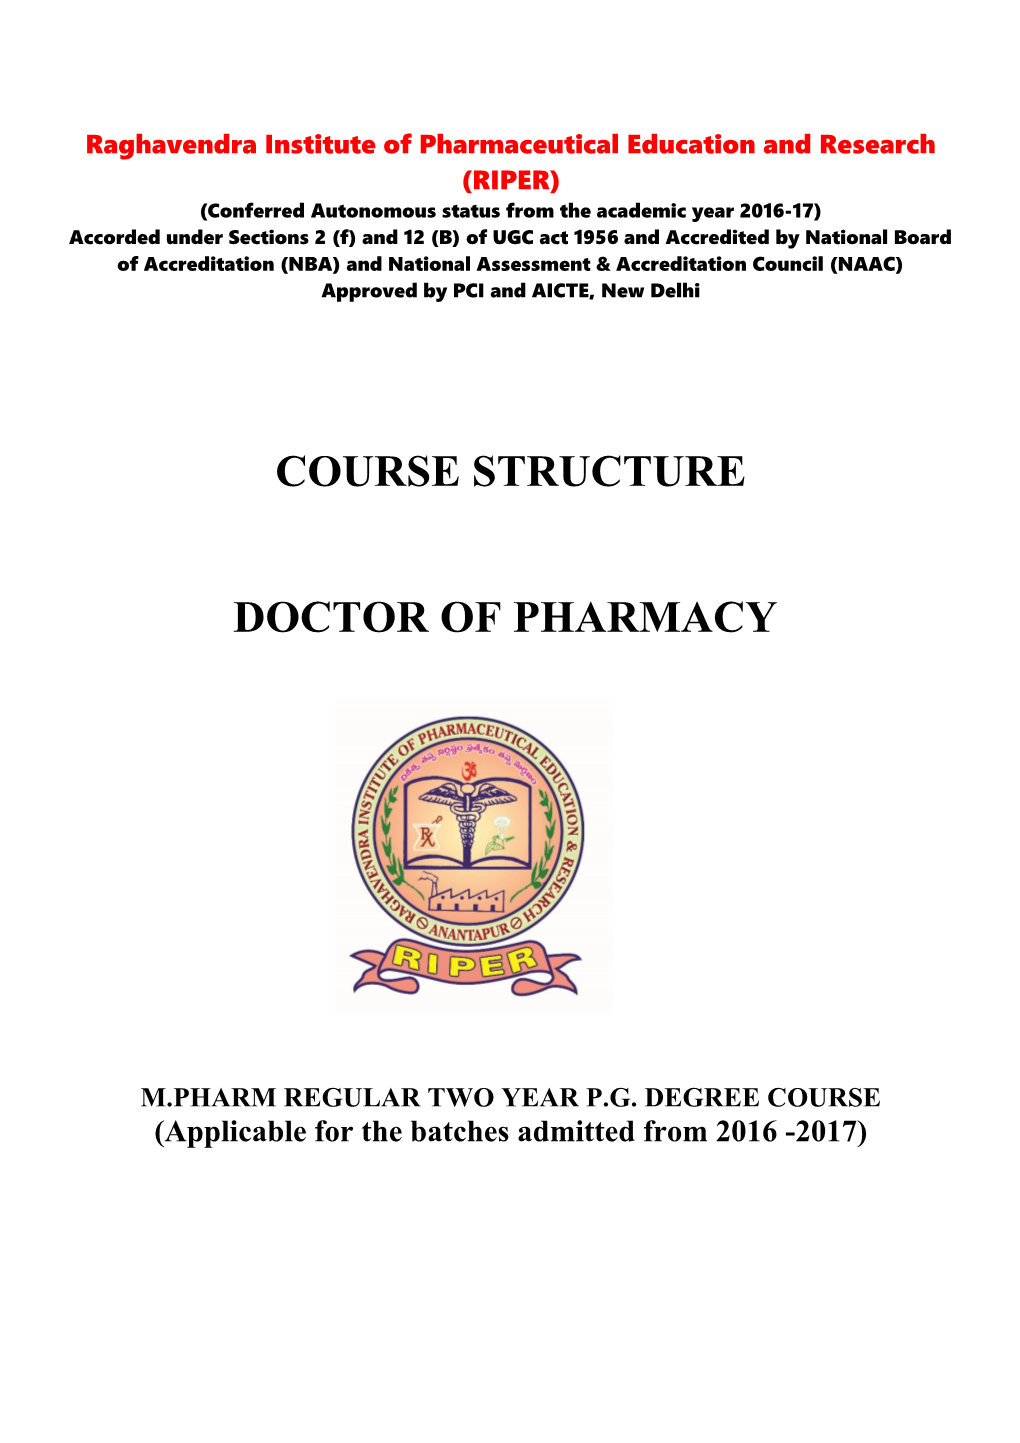 Raghavendra Institute of Pharmaceutical Education and Research (RIPER)